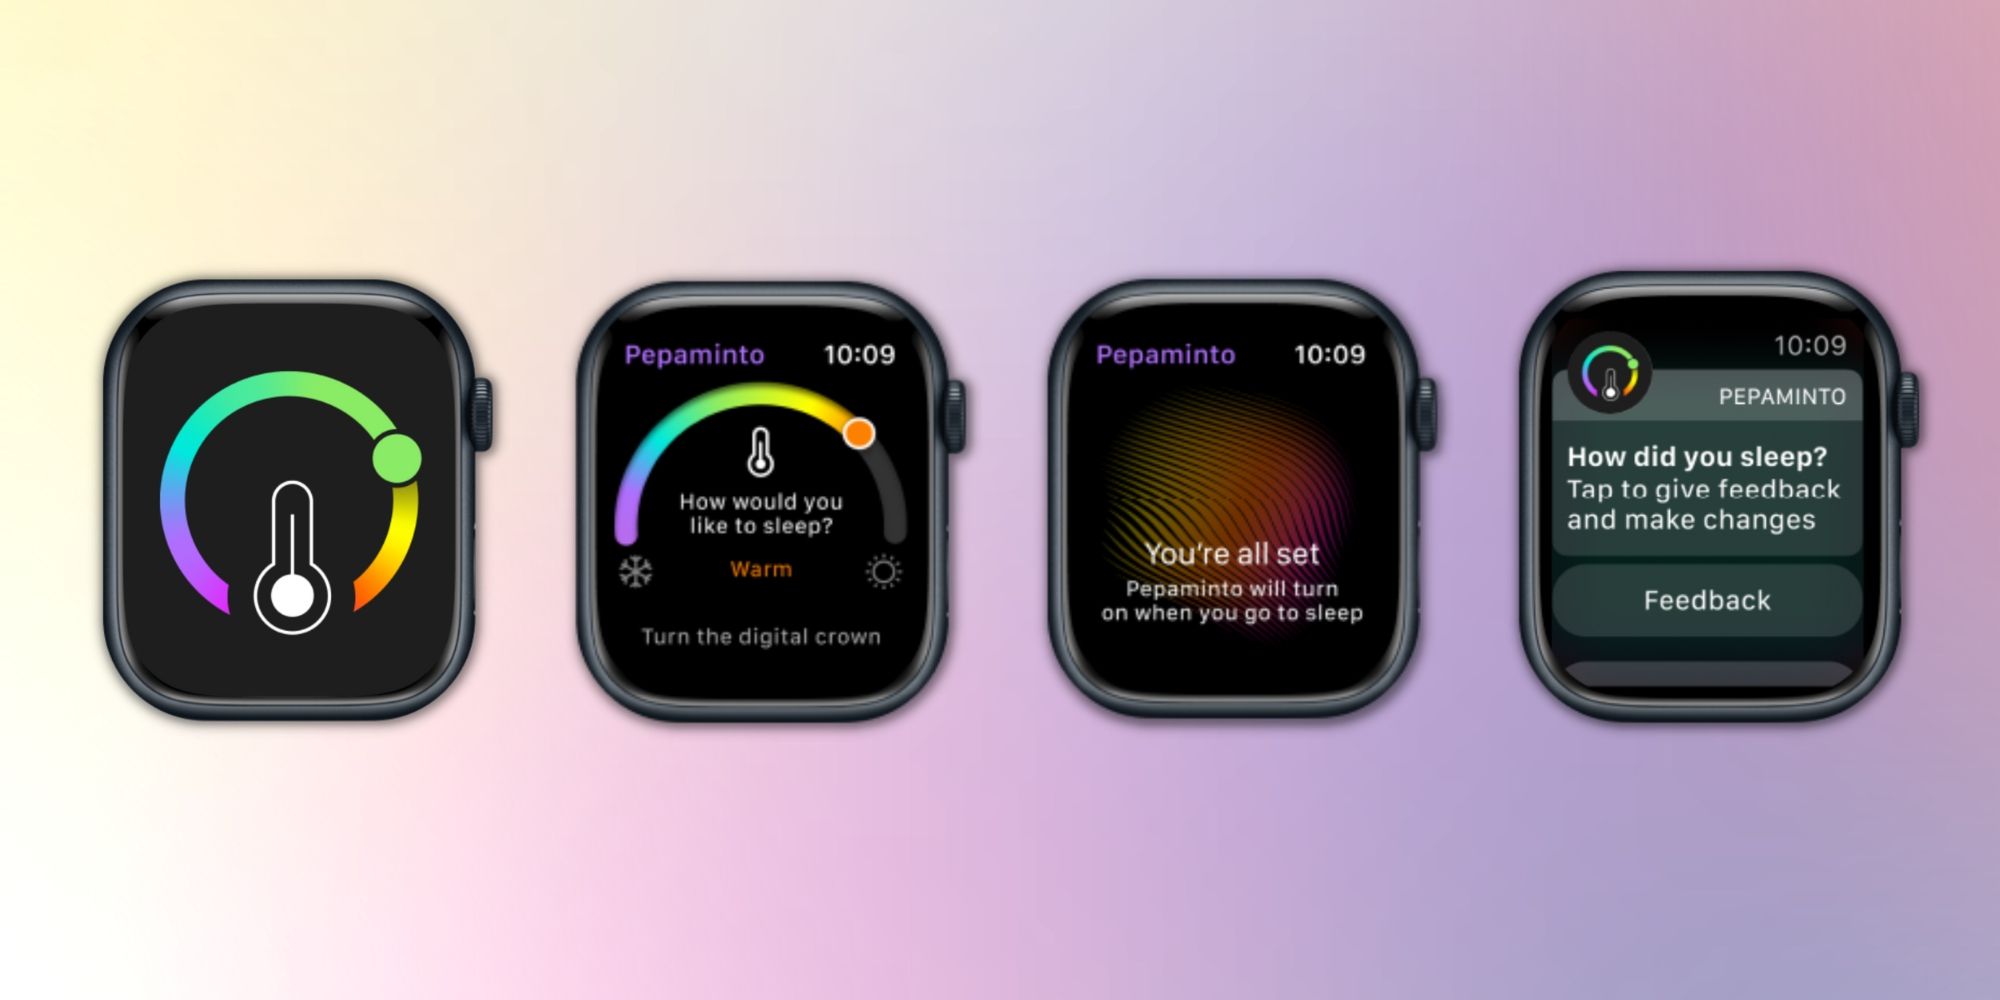 A screenshot of Pepaminto's smart top interface on Apple Watch with a colorful background